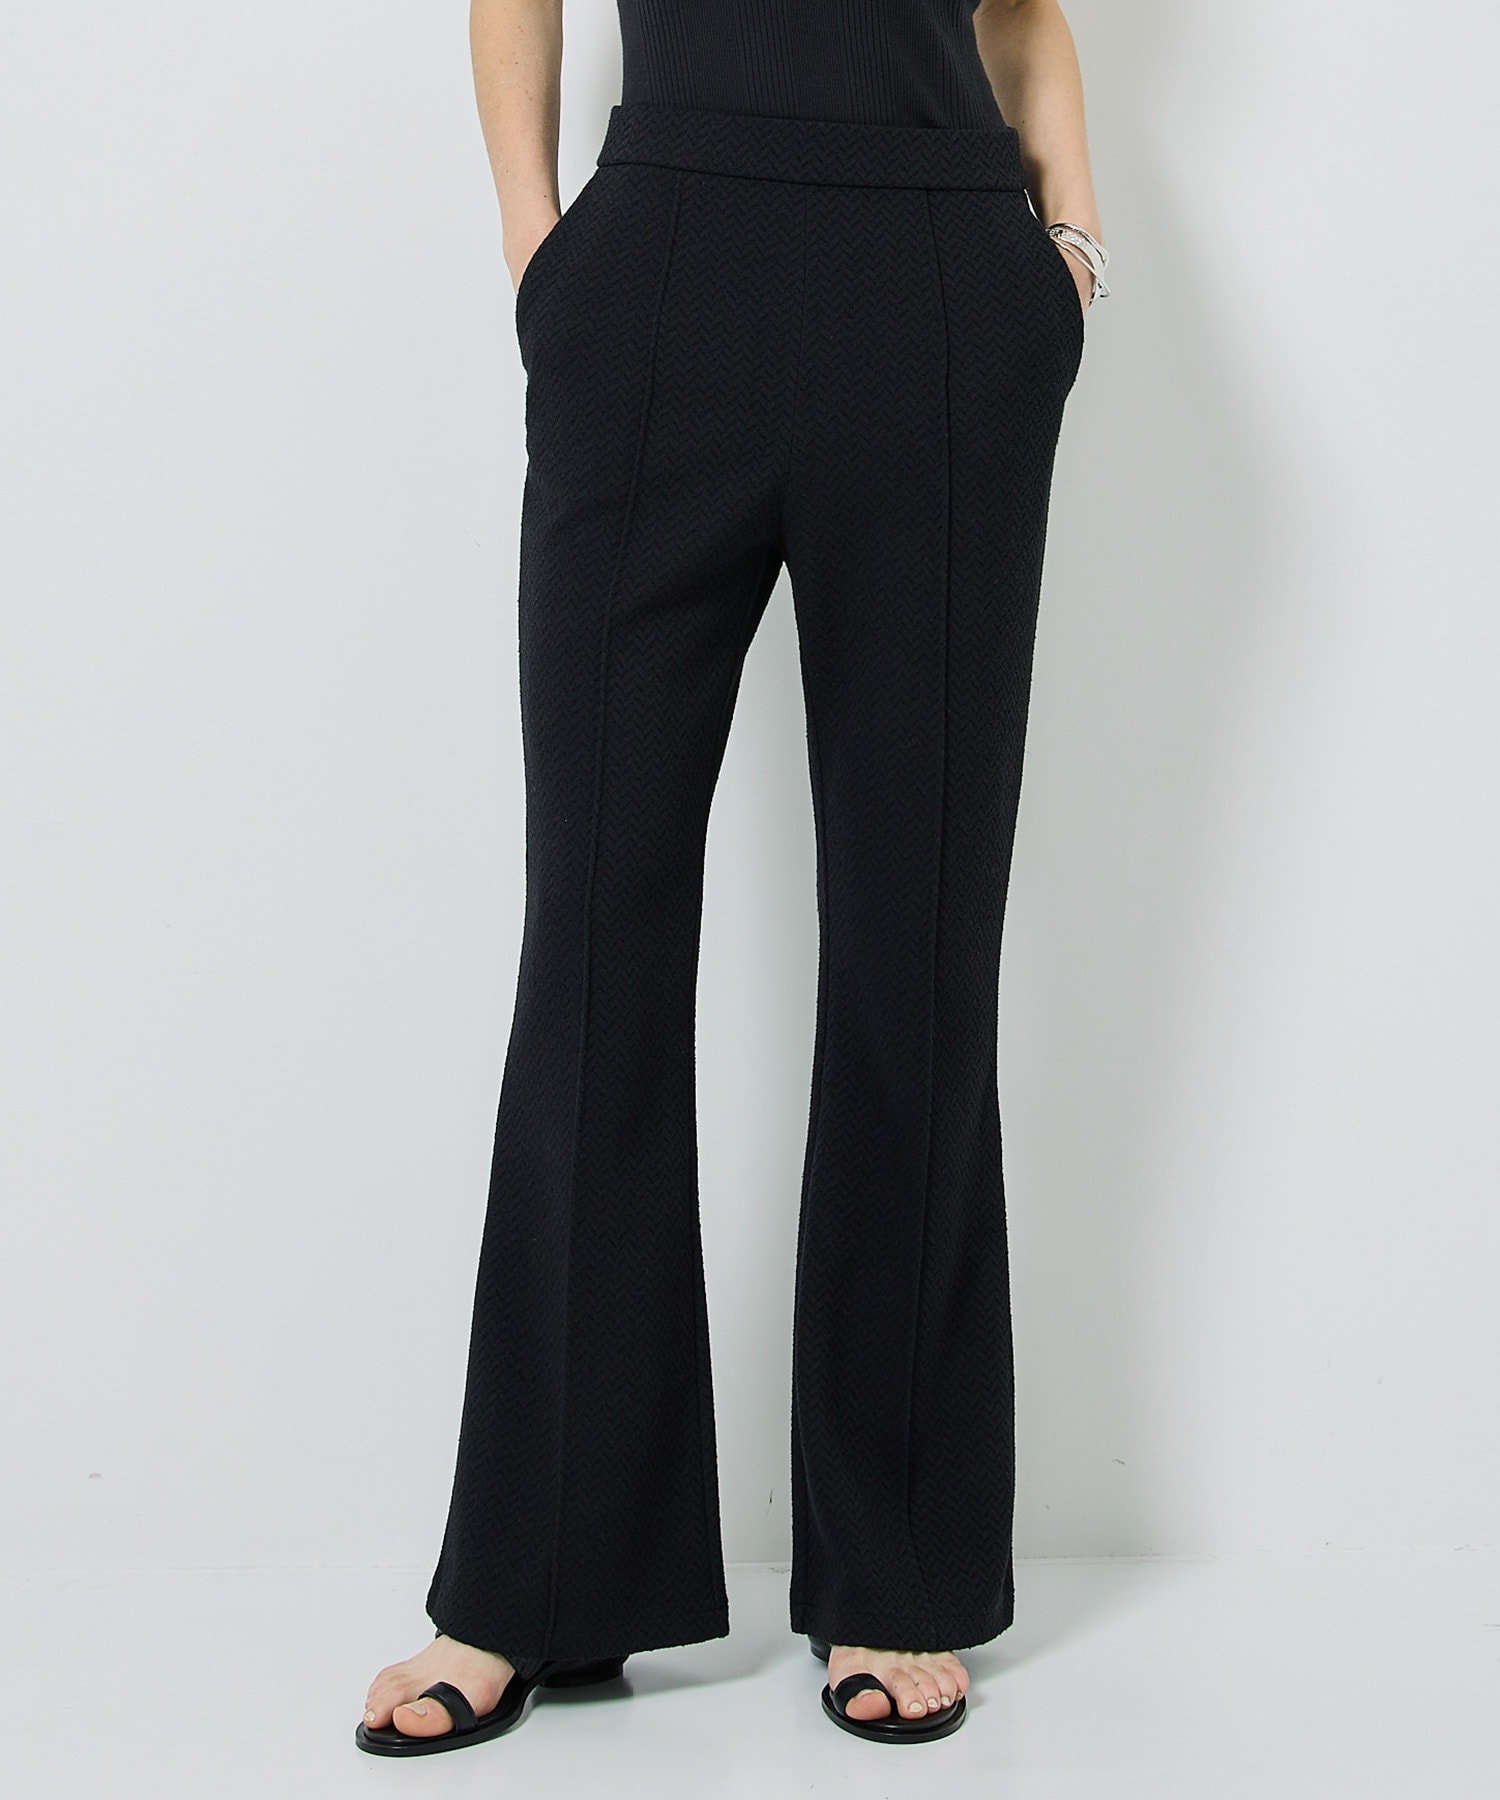 Almighty Stretch Flare Pants